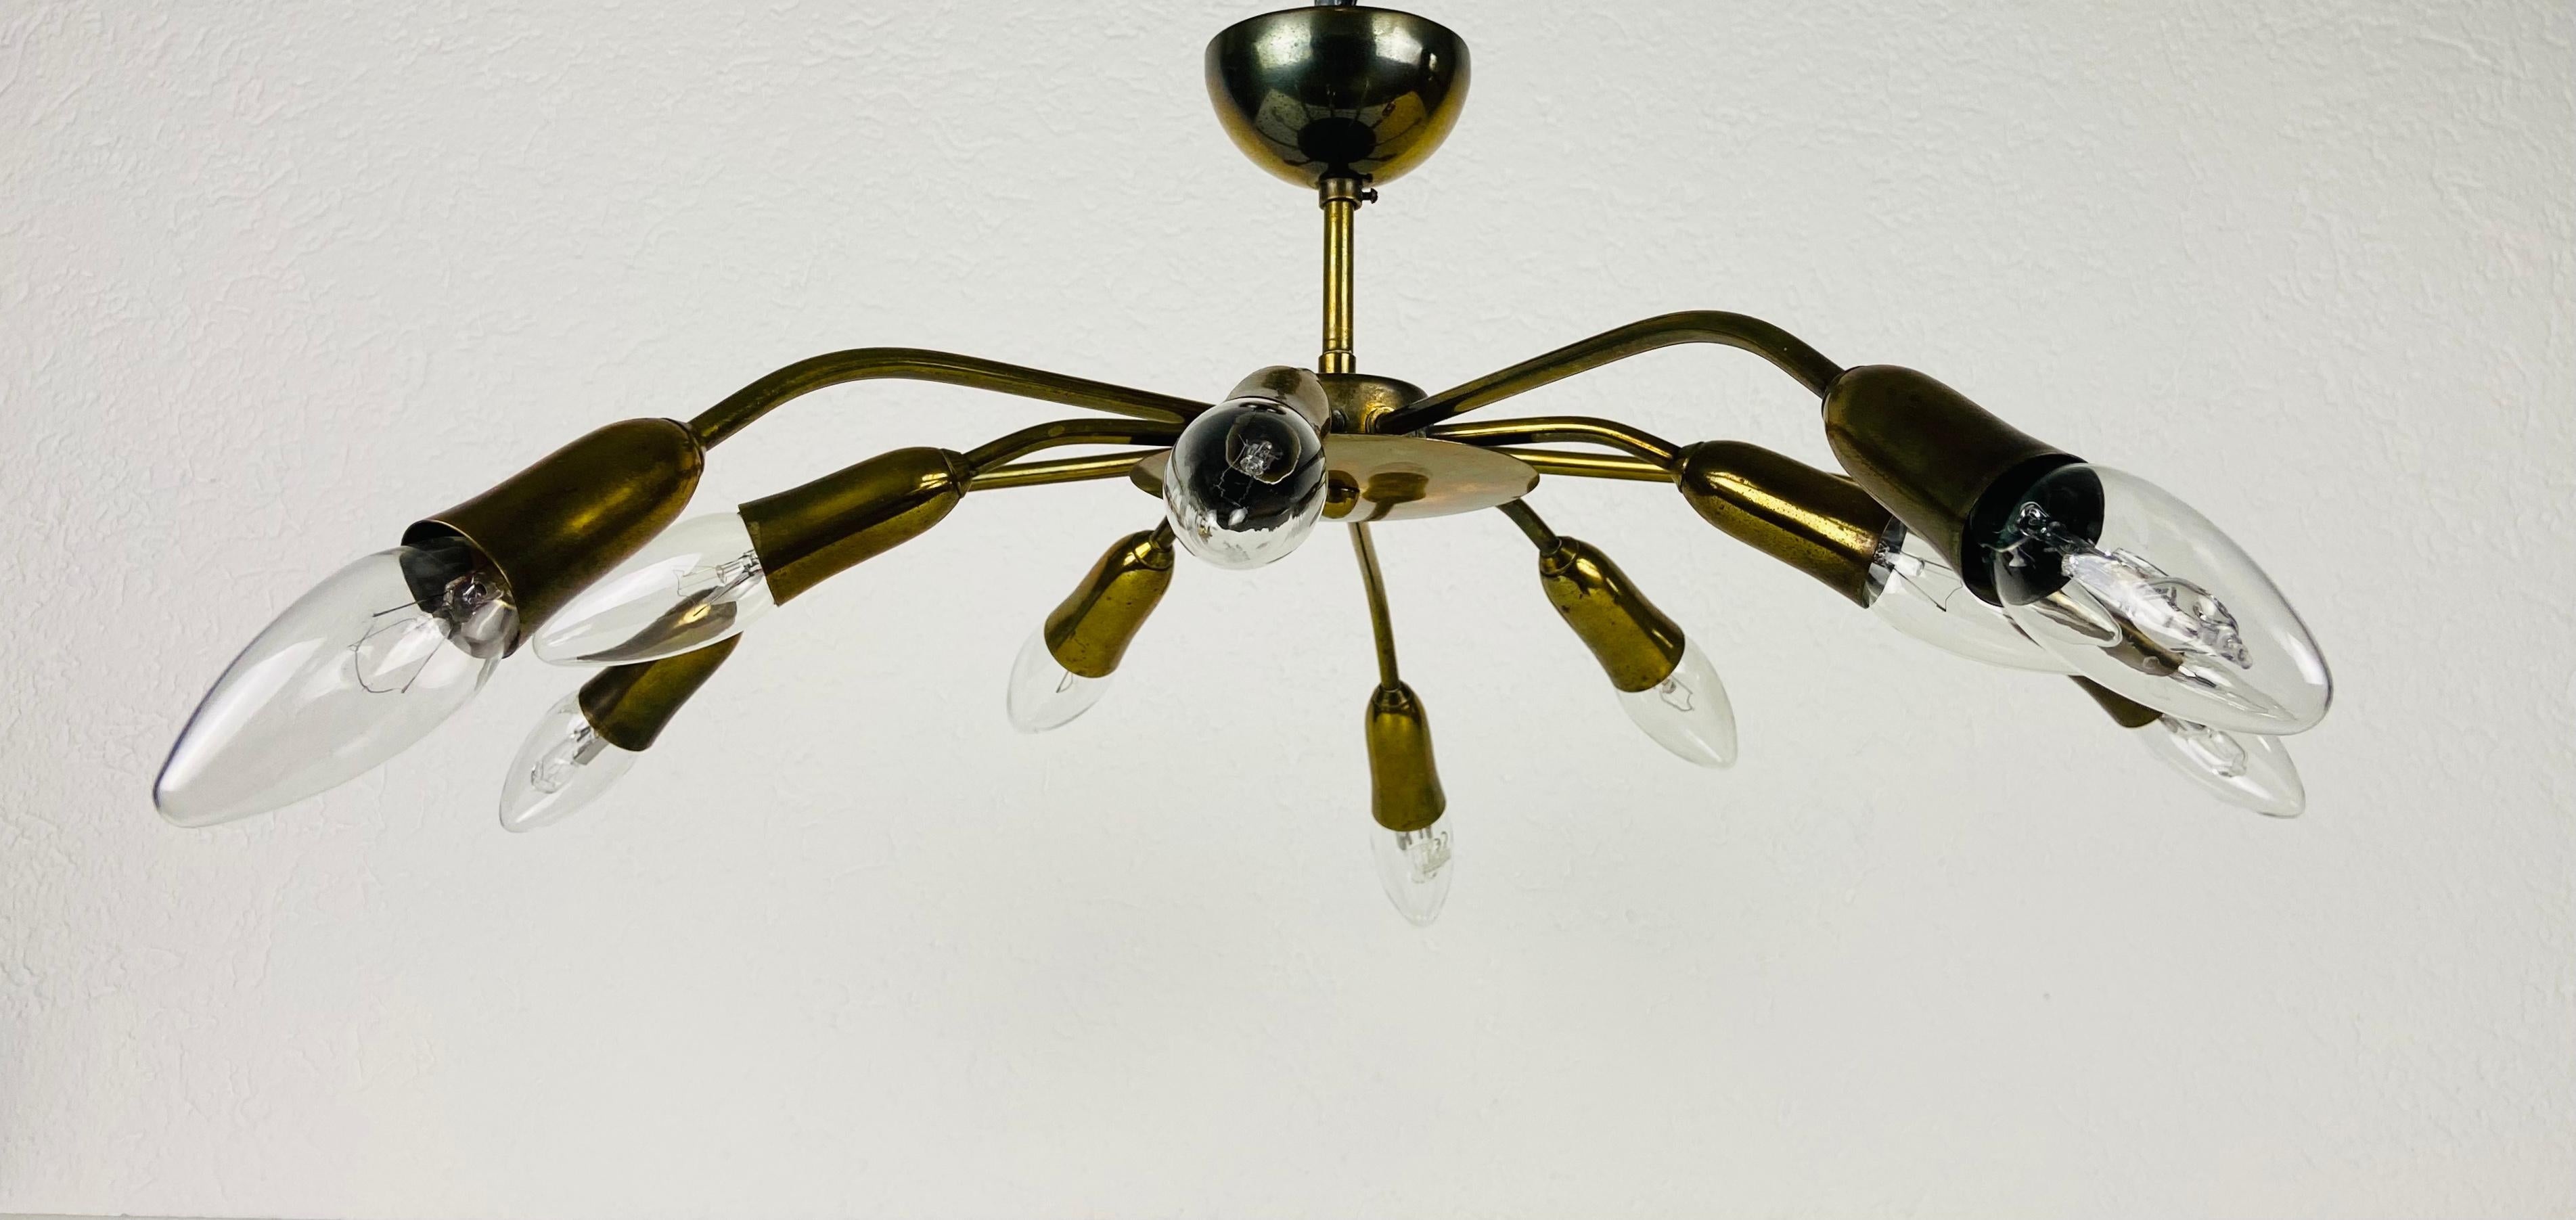 A Sputnik chandelier made in Italy in the 1950s. It is fascinating with its ten brass arms, each of it with an E14 light bulb. The shape of the light is similar to a spider.

The light requires 10 E14 light bulbs. Works with both 120/220V. Good